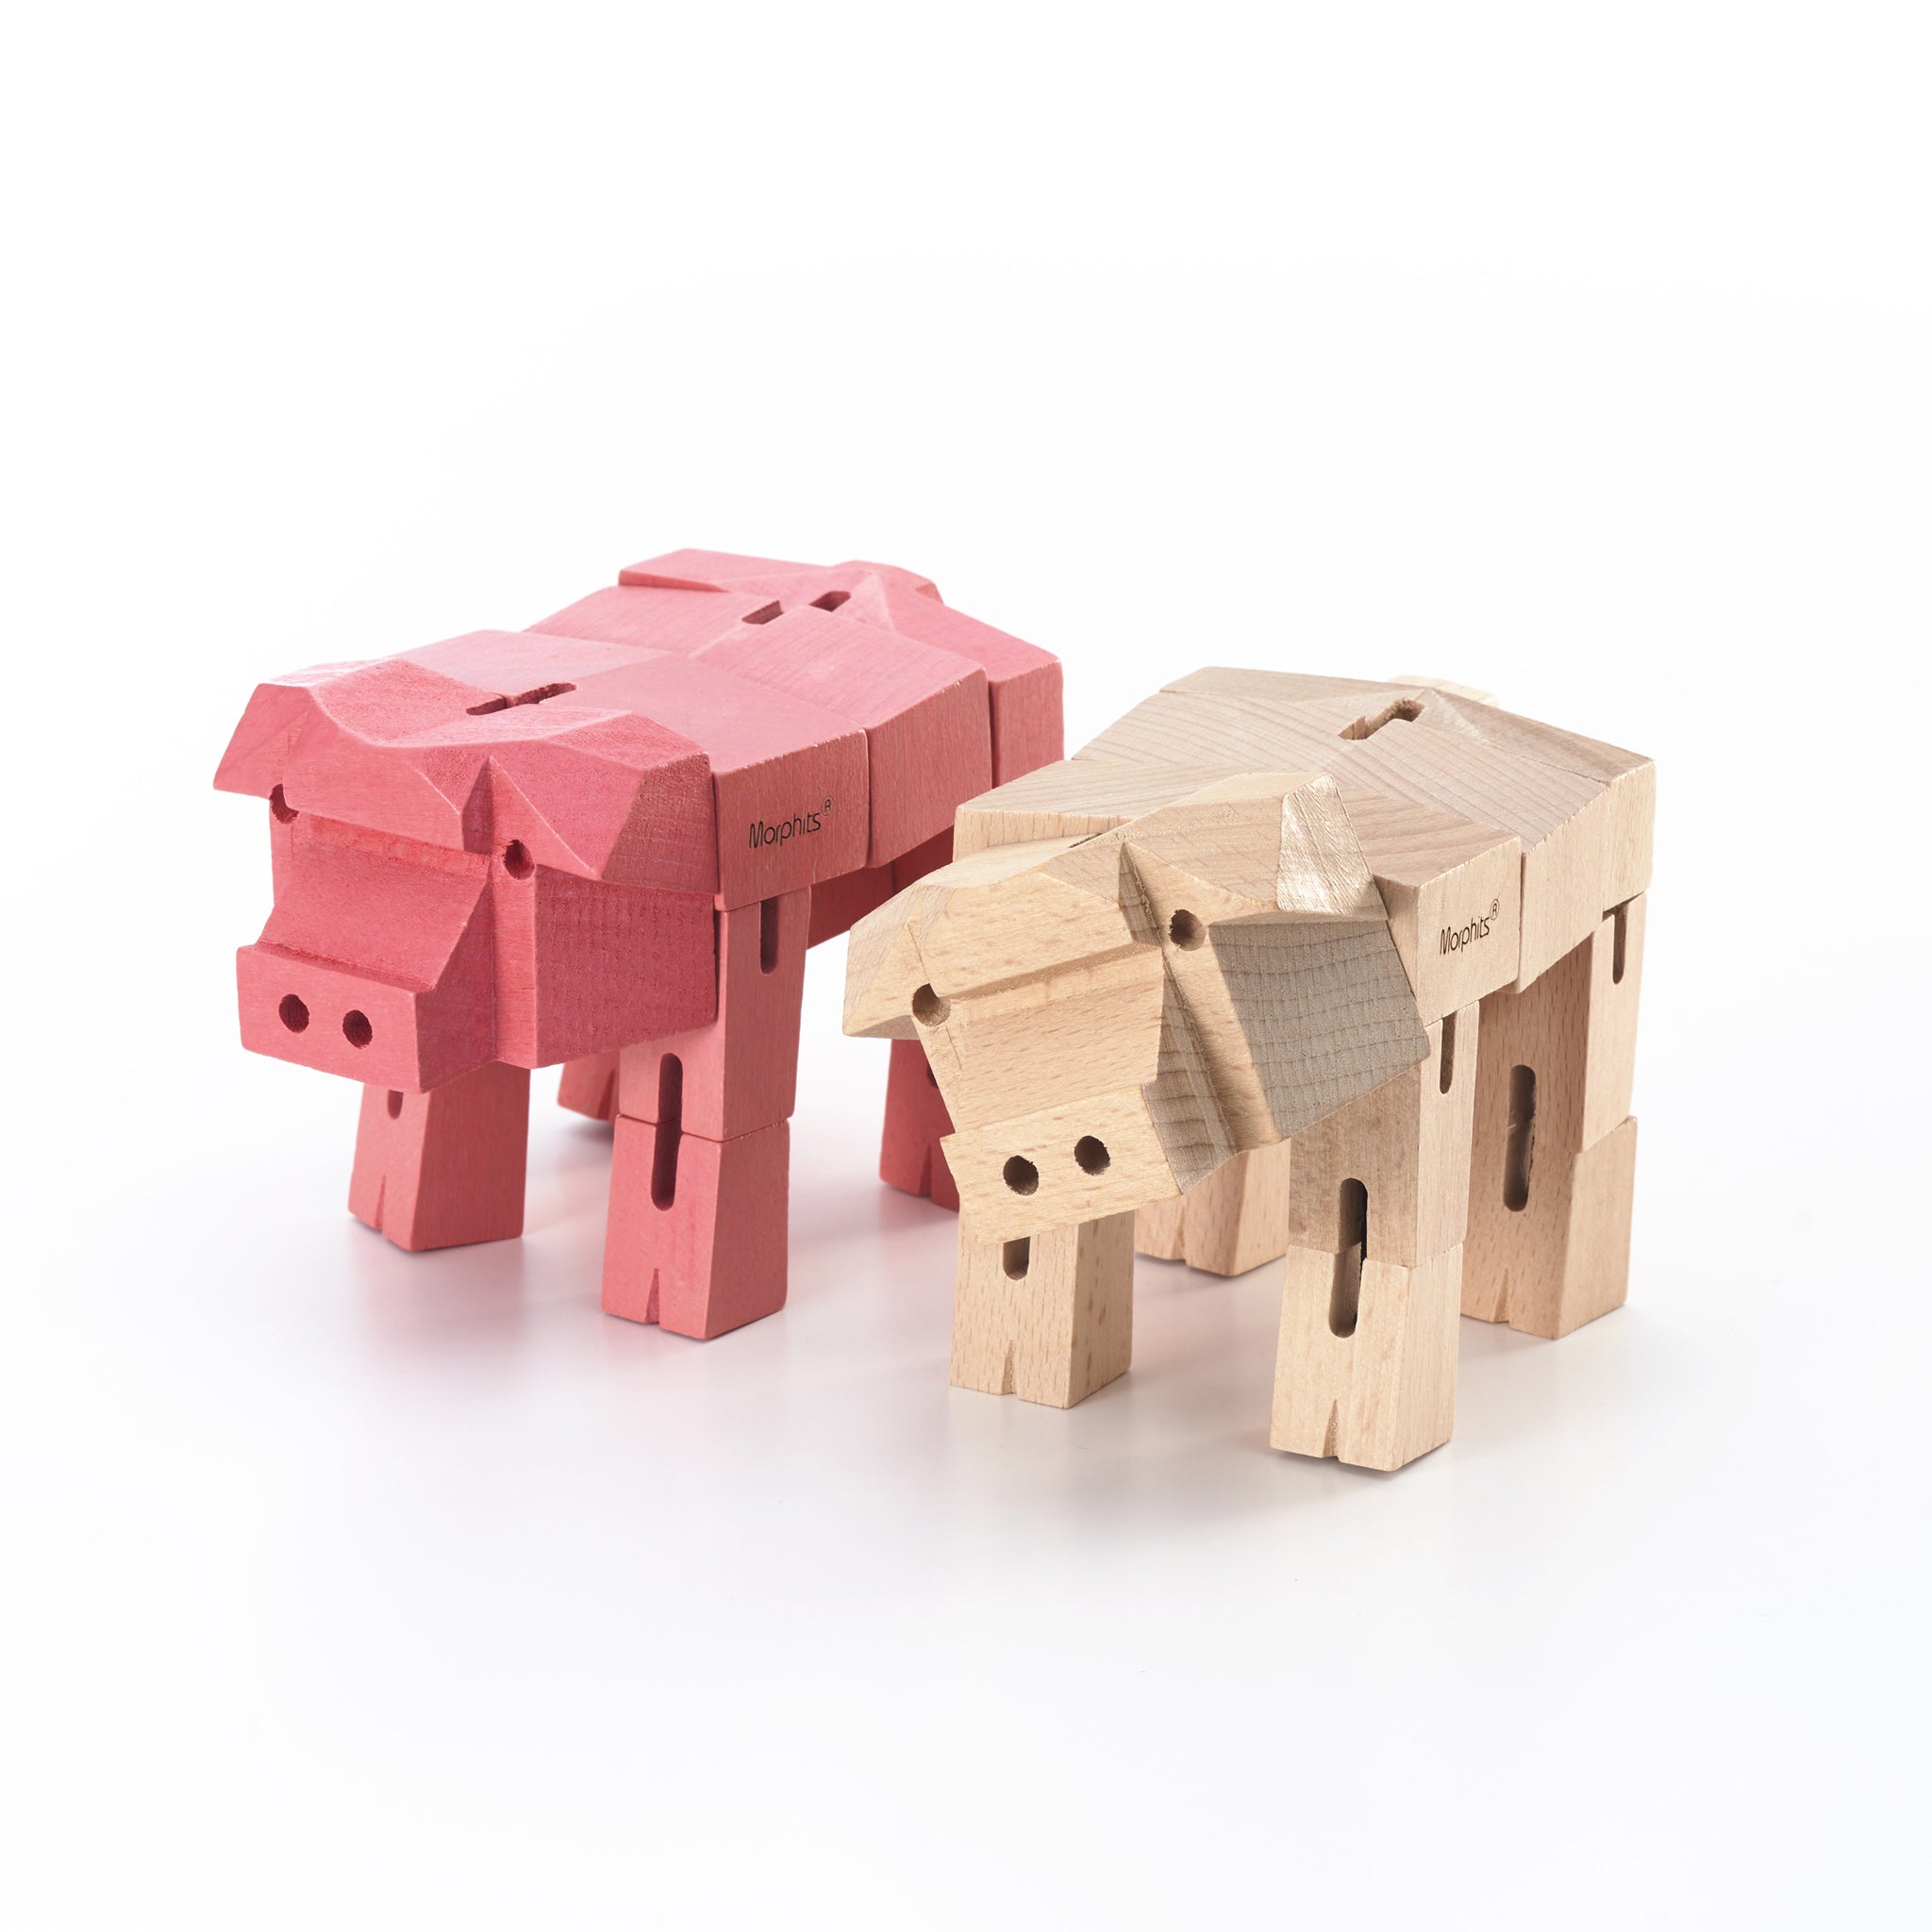 Morphits ® Pig  Wooden Toy Playset Puzzle Pink and Natural